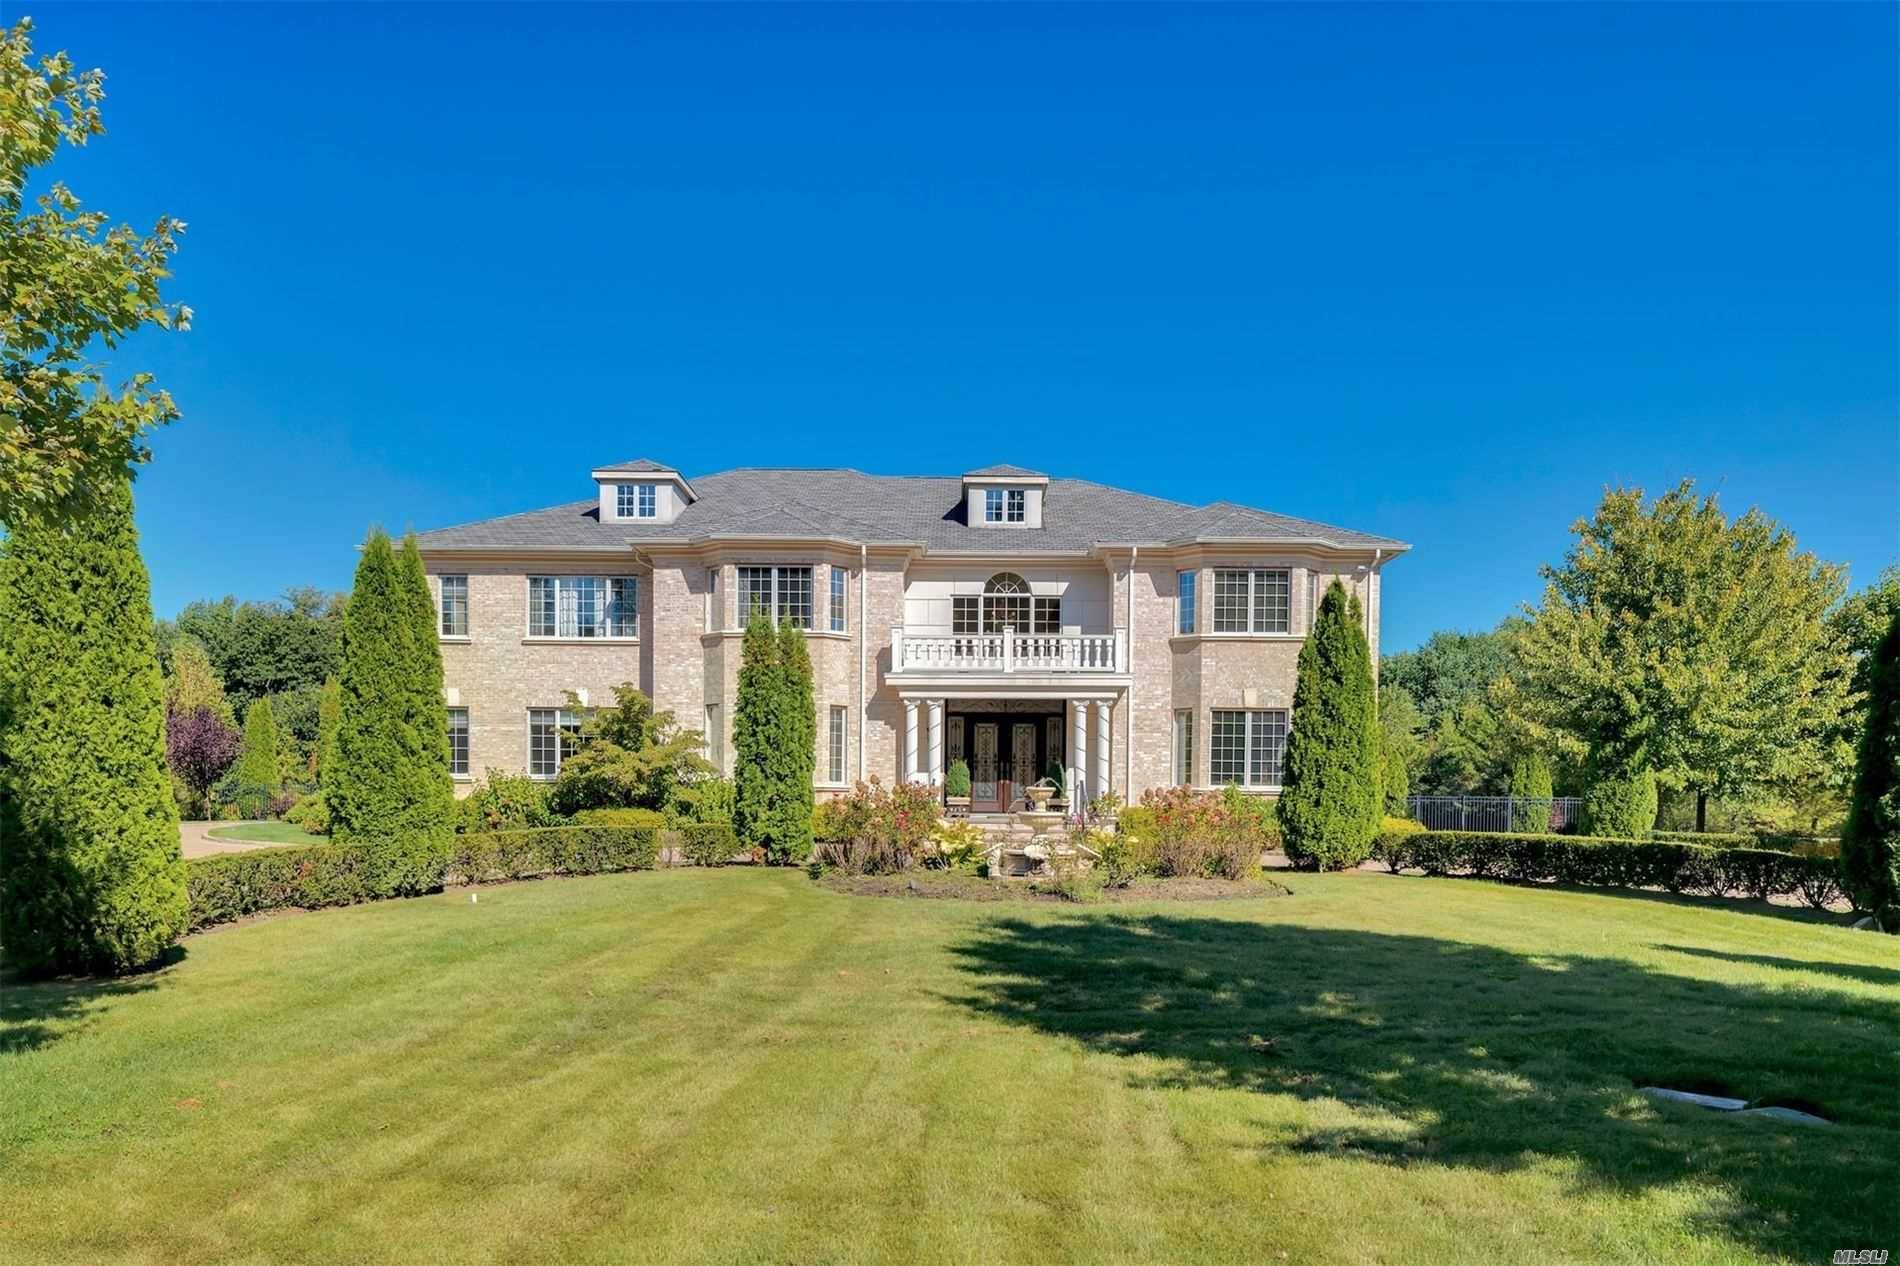 Reminiscent of a French villa, this elegant, sun swept 7, 100 square foot, six bedroom, five and a half bath, brick Colonial is a perfect venue for gracious Gold Coast ...